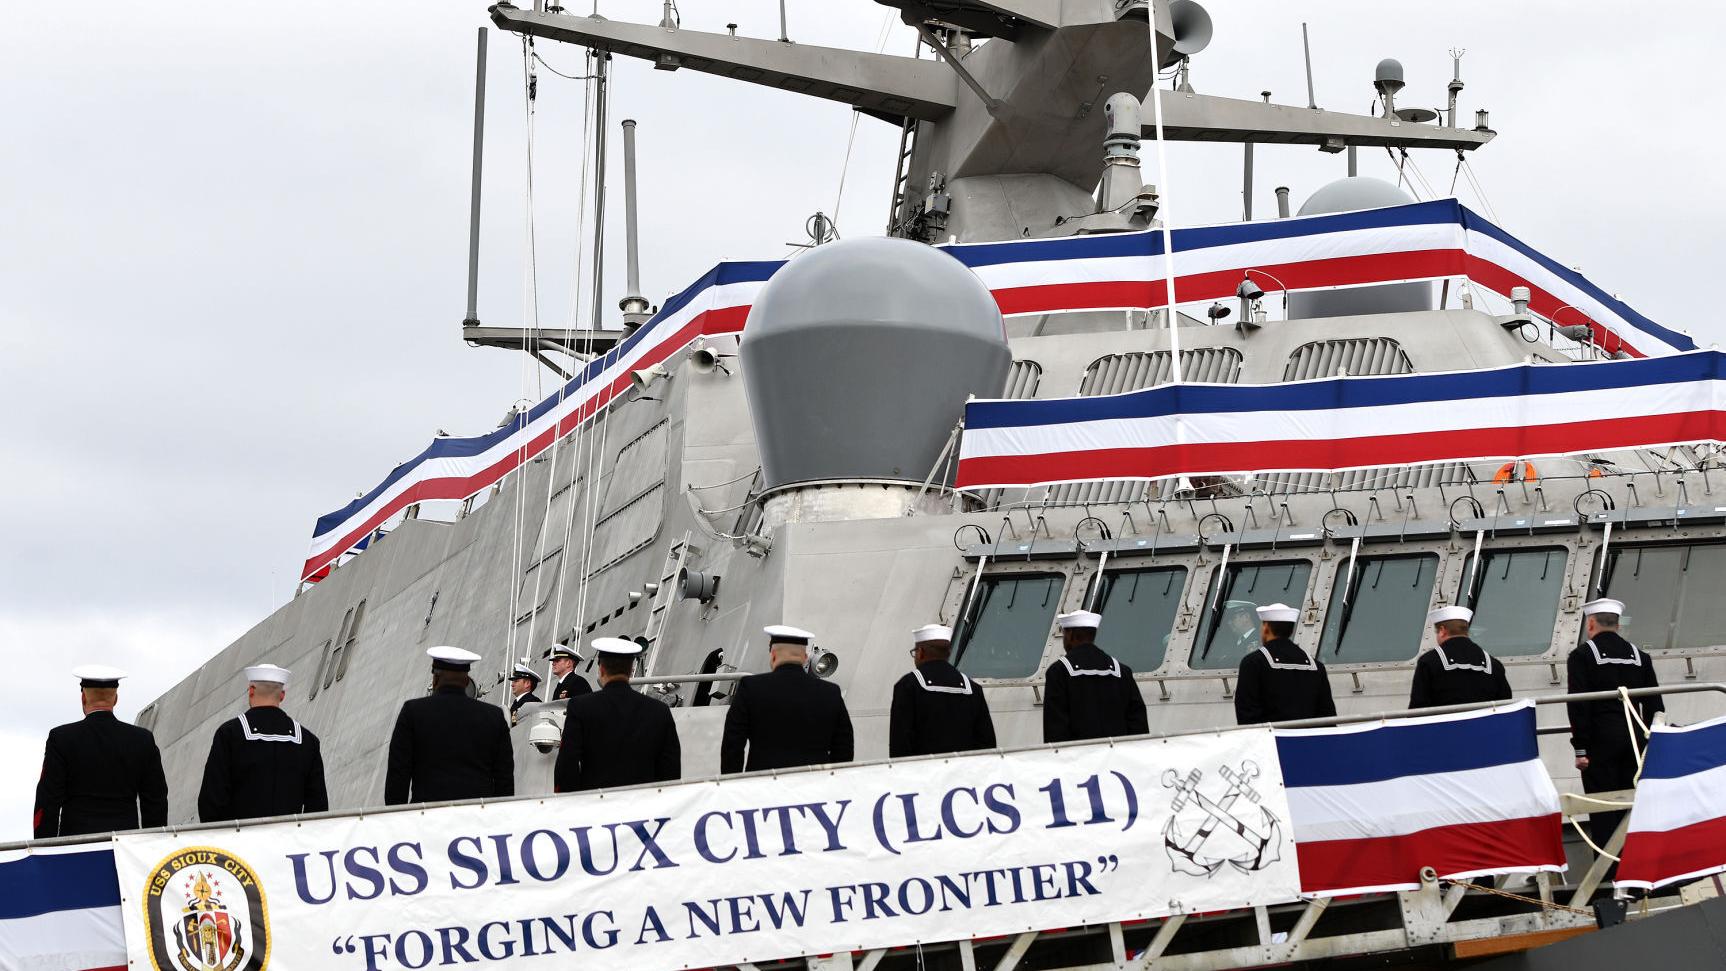 USS Sioux City's decommissioning brings shock, disappointment